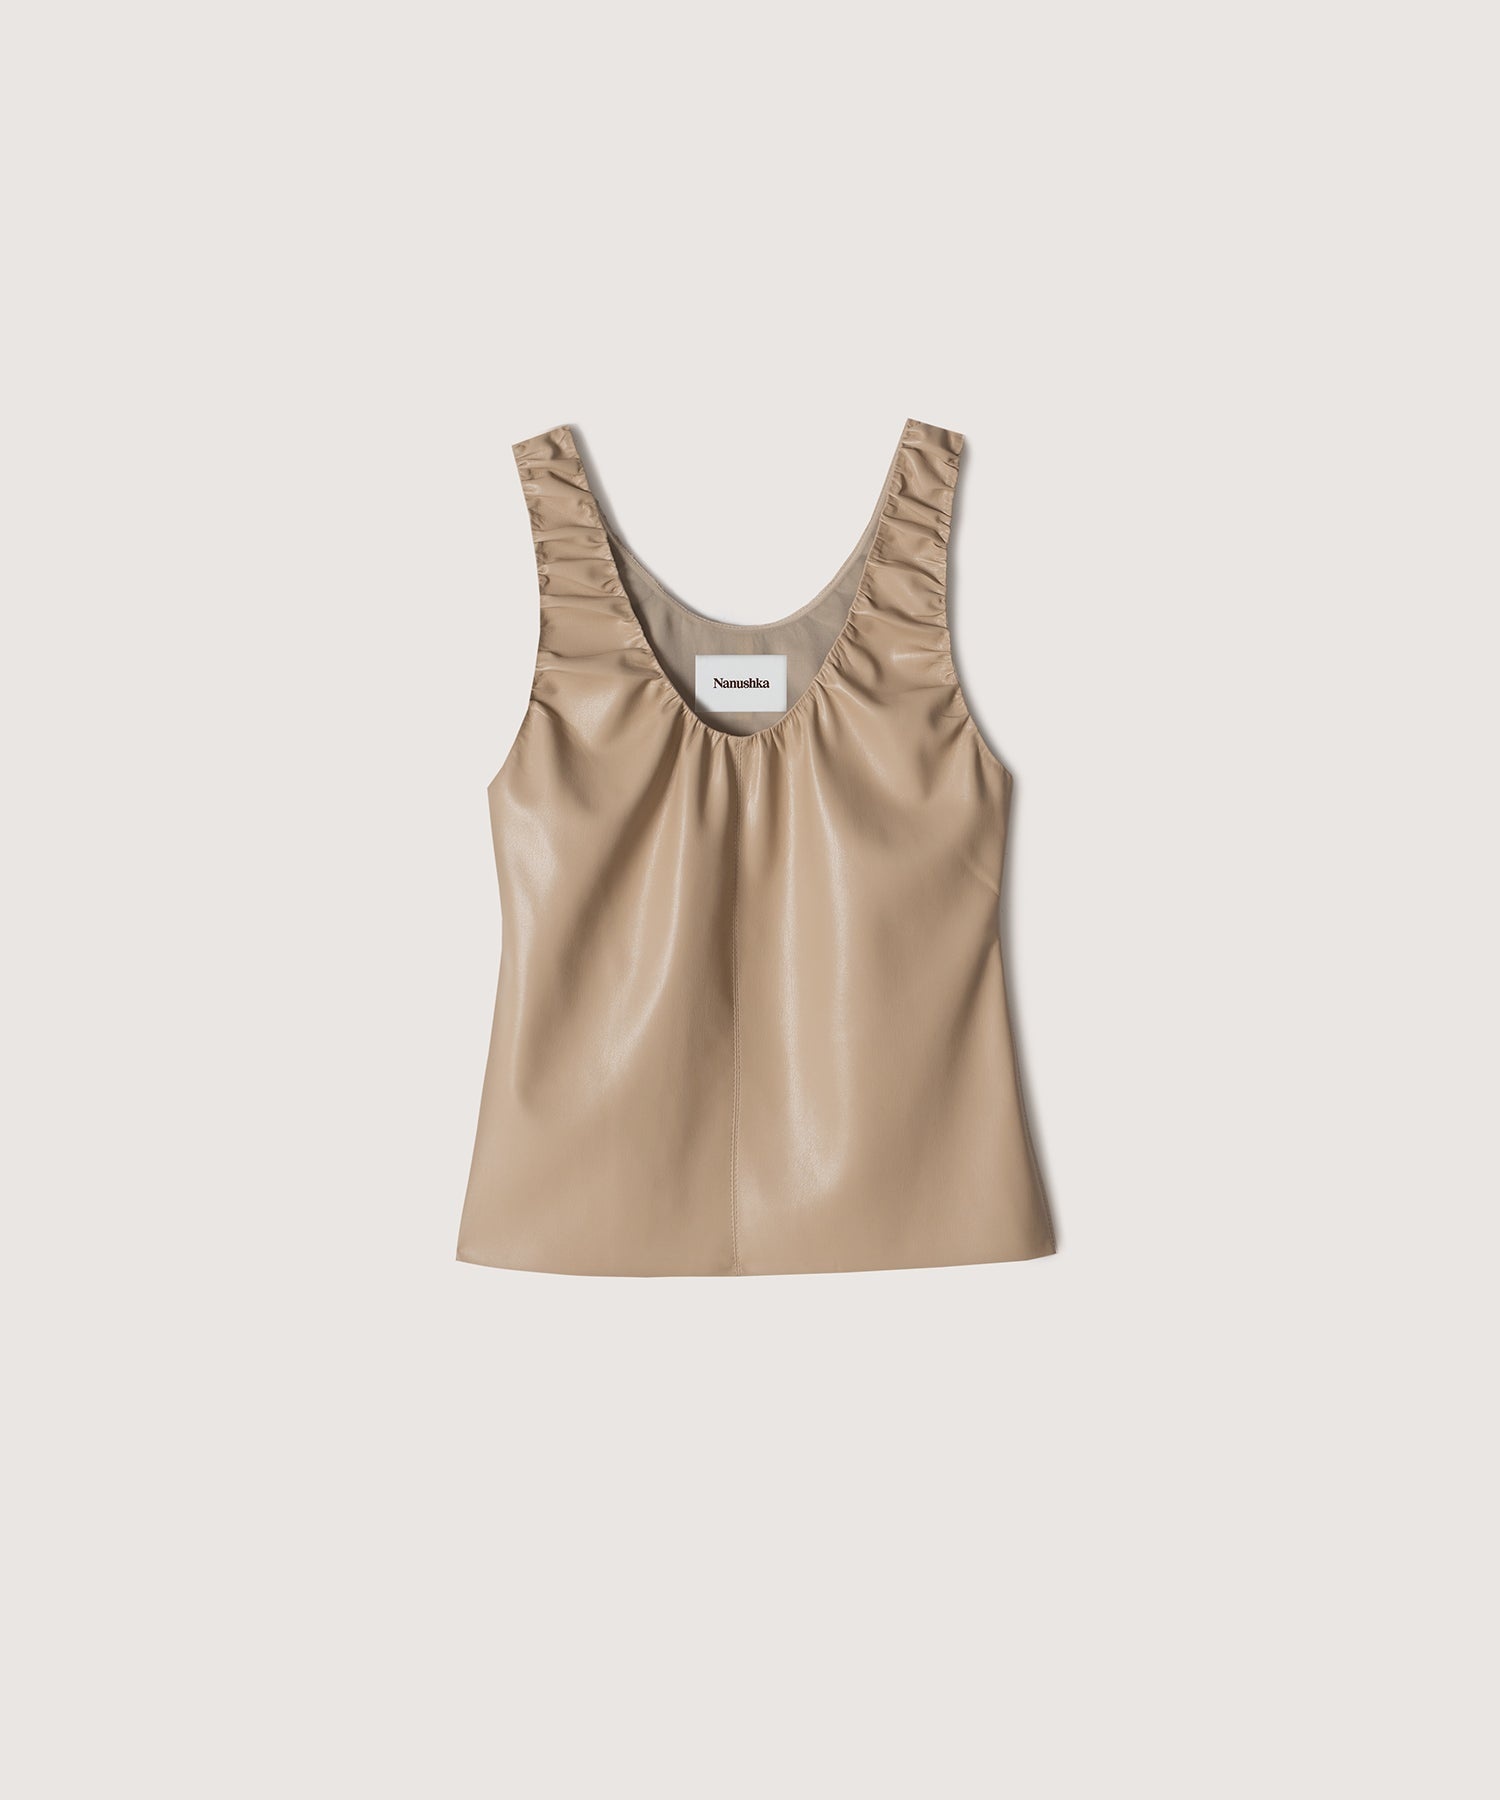 Ruched Vegan Leather Top - 1